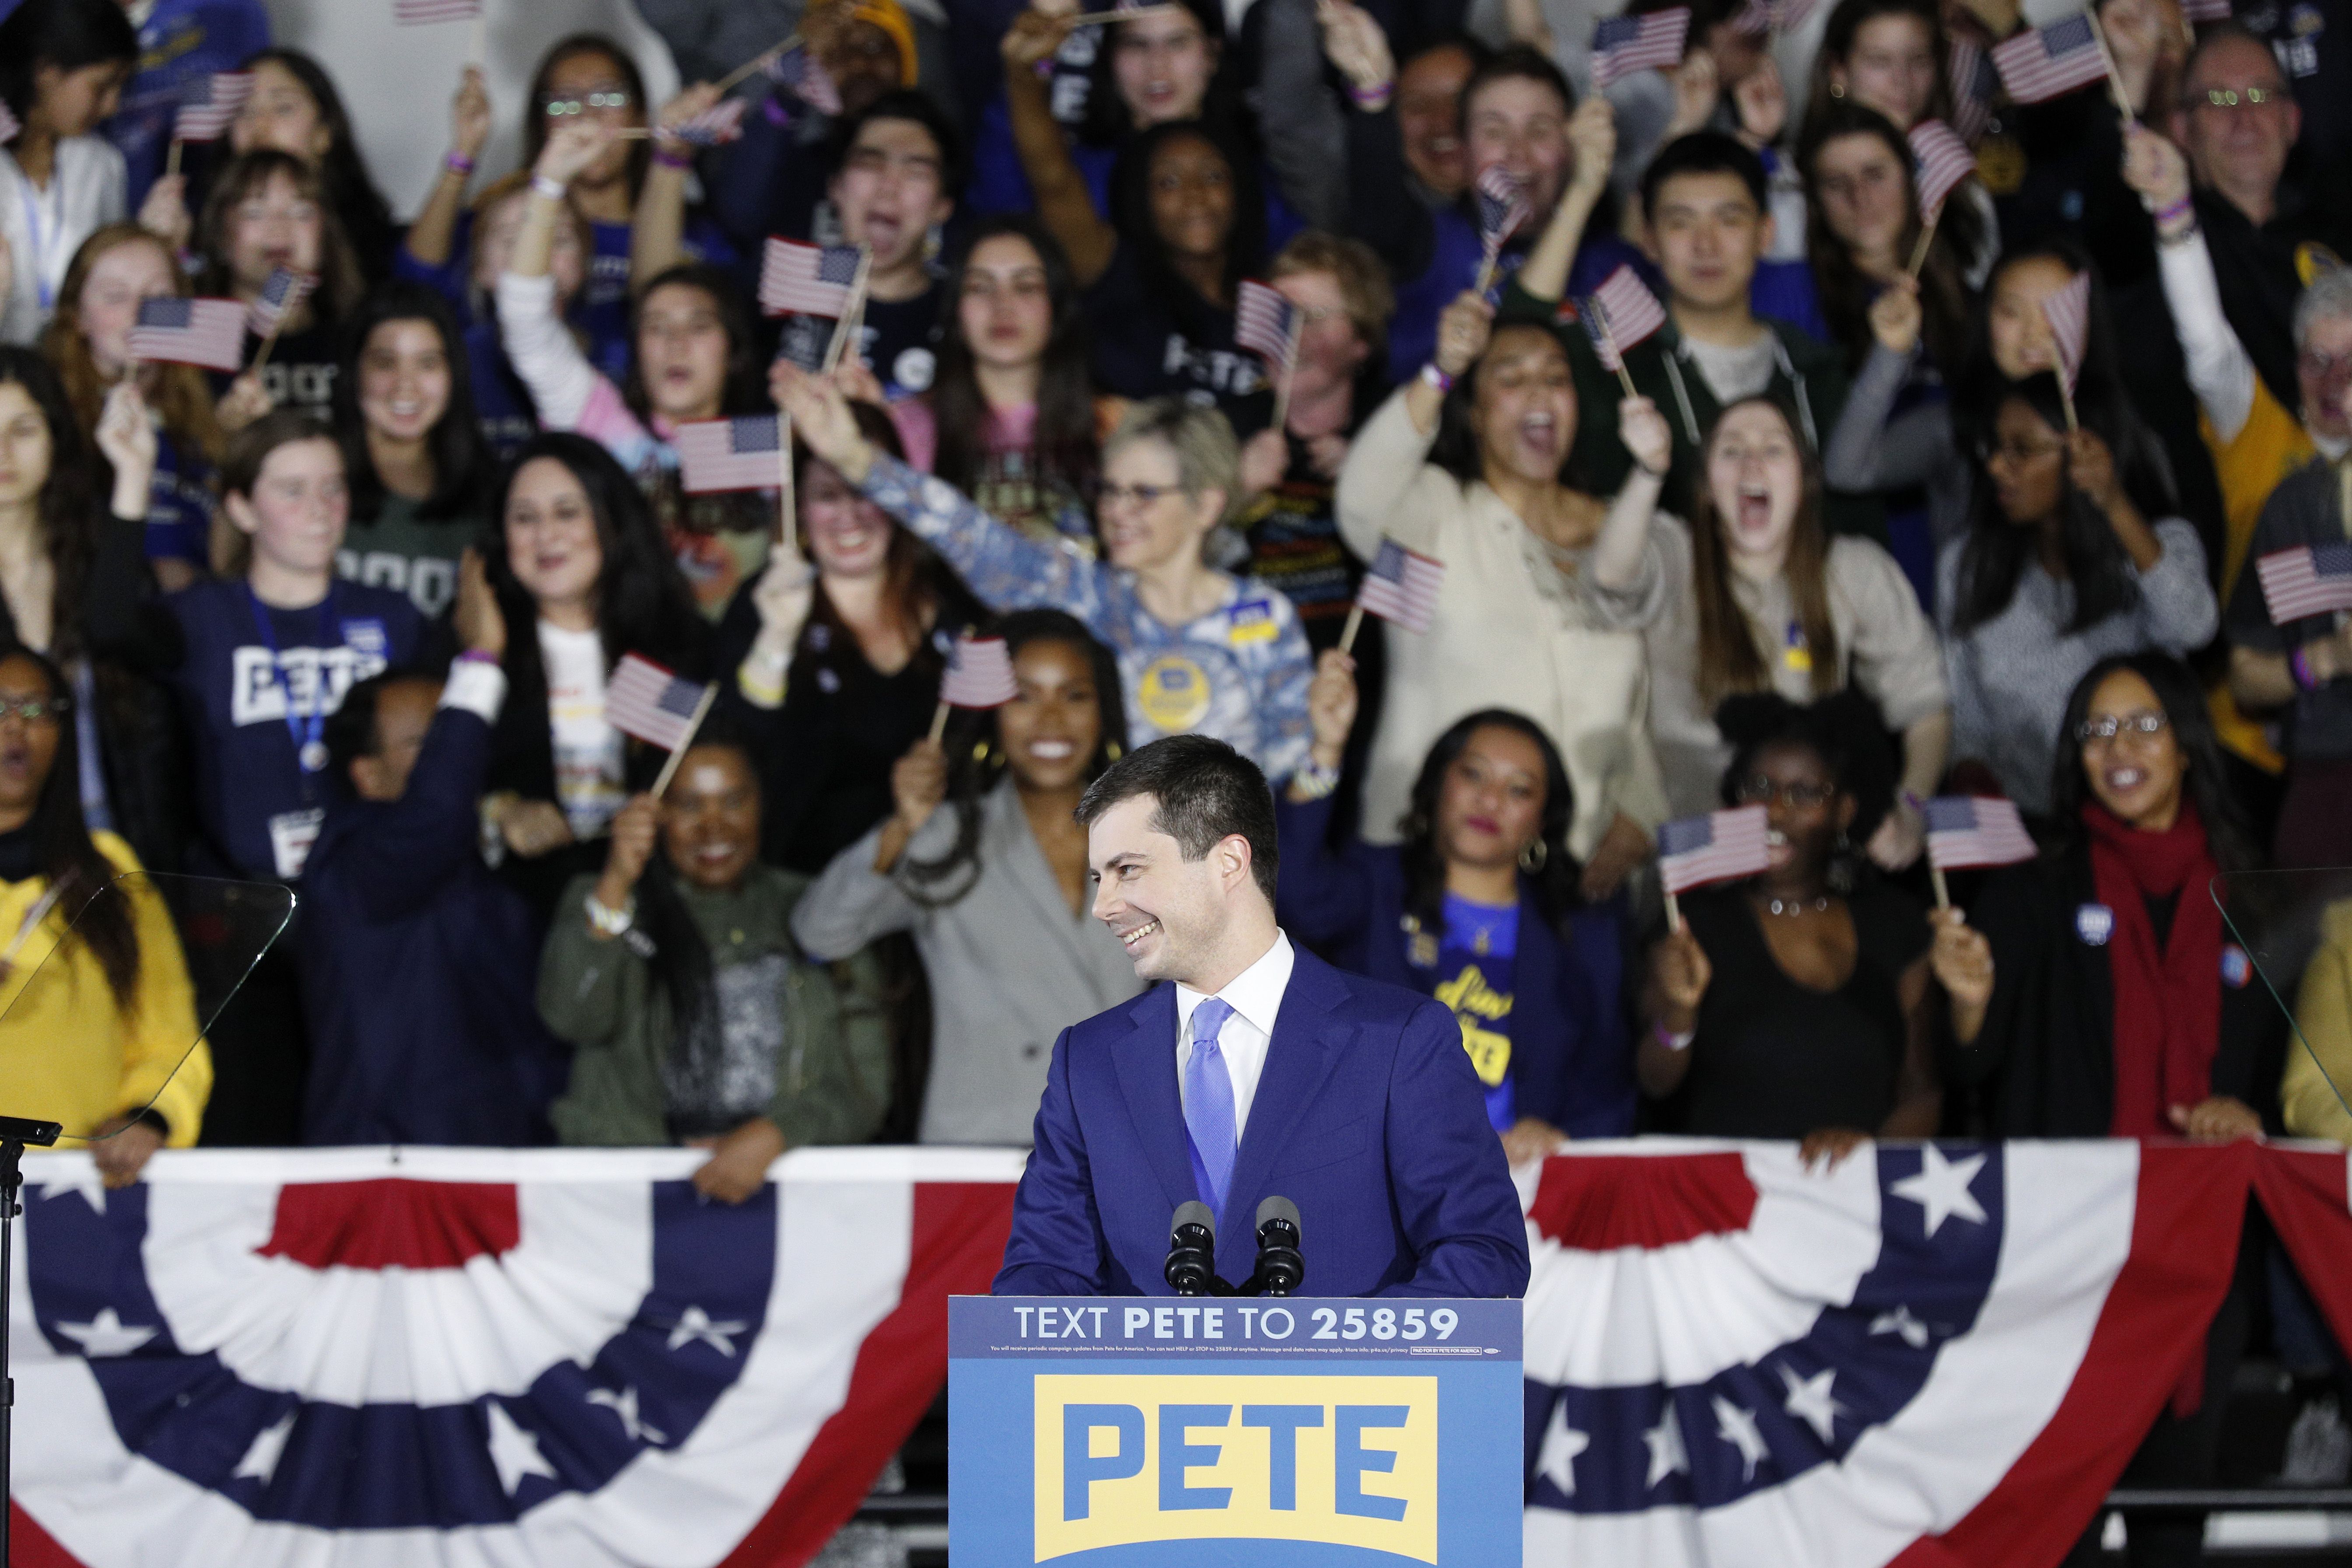 Pete Buttigieg stands at a lectern with a crowd cheering behind him. Several people wave American flags.